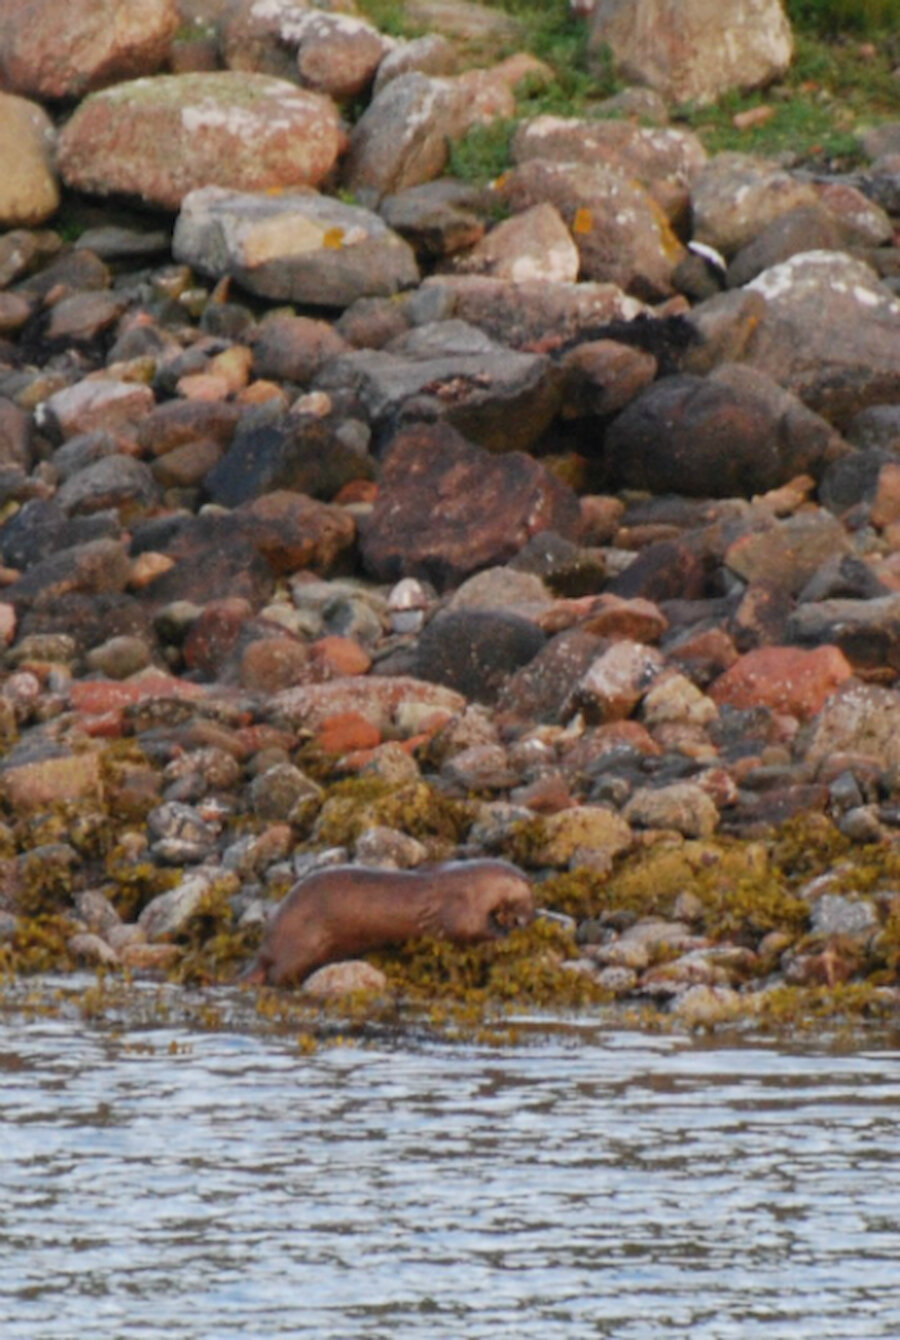 Otters are harder to find than seals; however, I spotted this one quite close to home (Courtesy Alastair Hamilton)